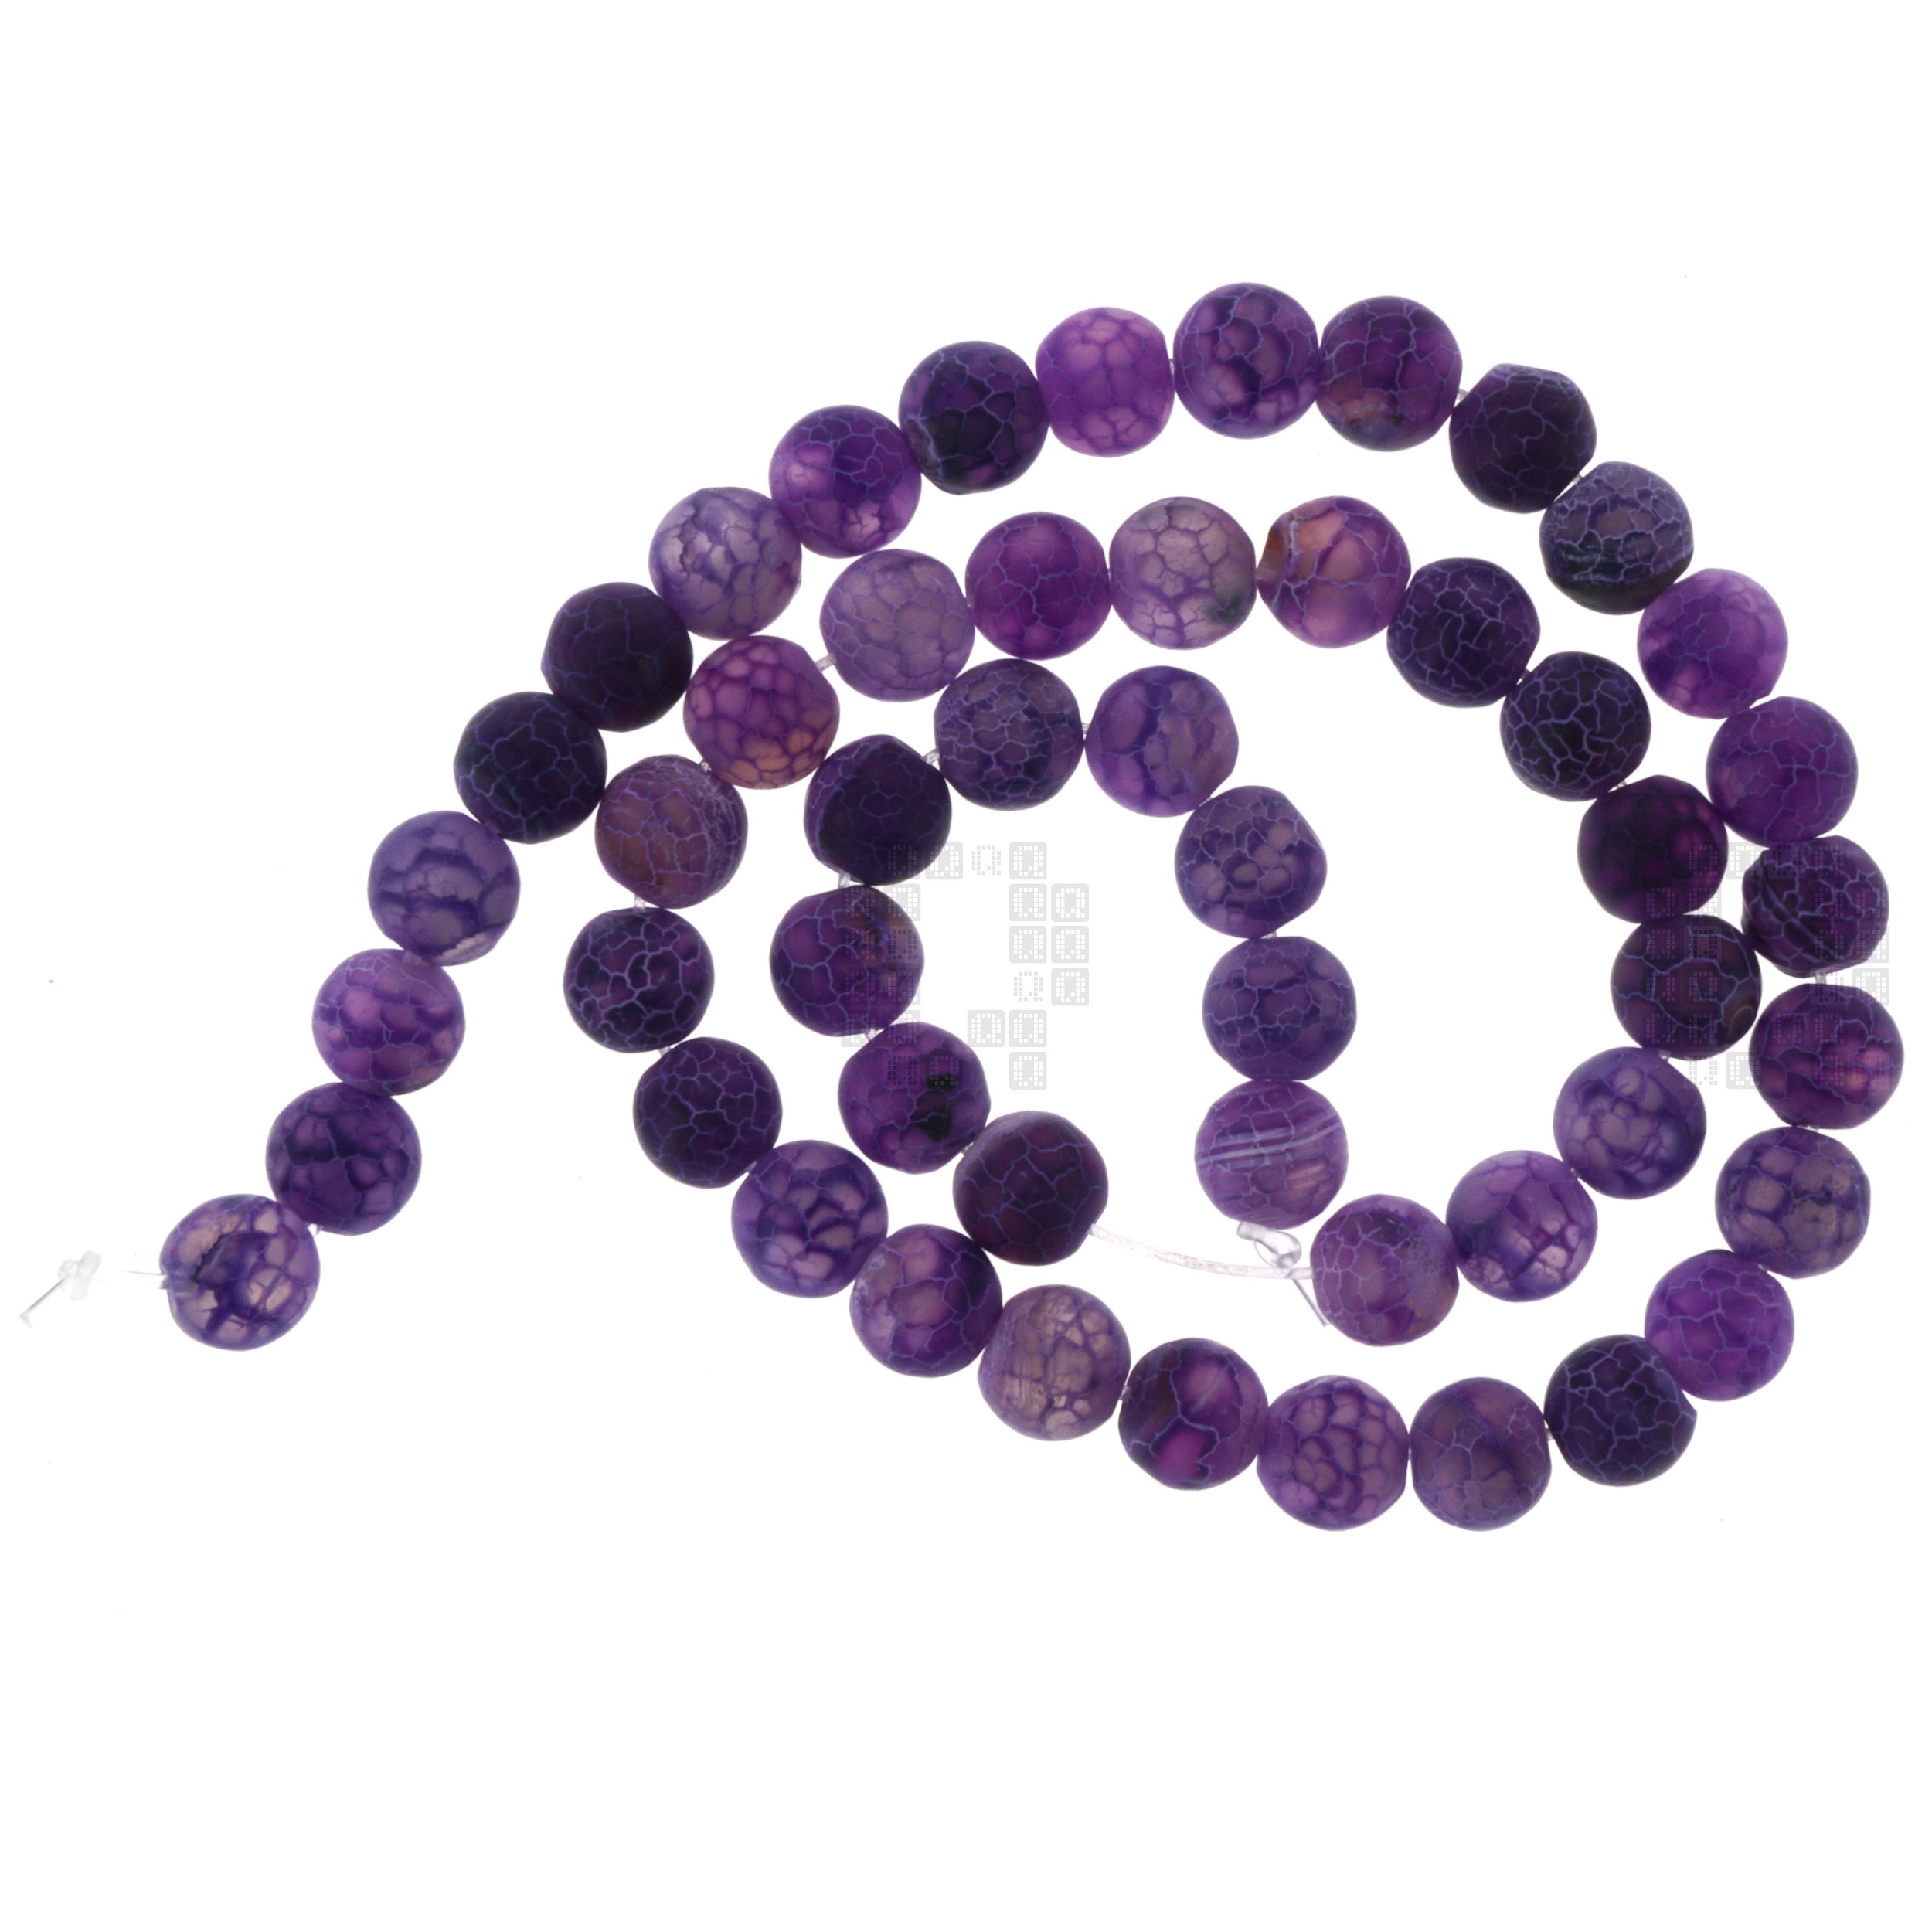 Purple Frost Cracked Agate 8mm Round Beads, 45 Pieces